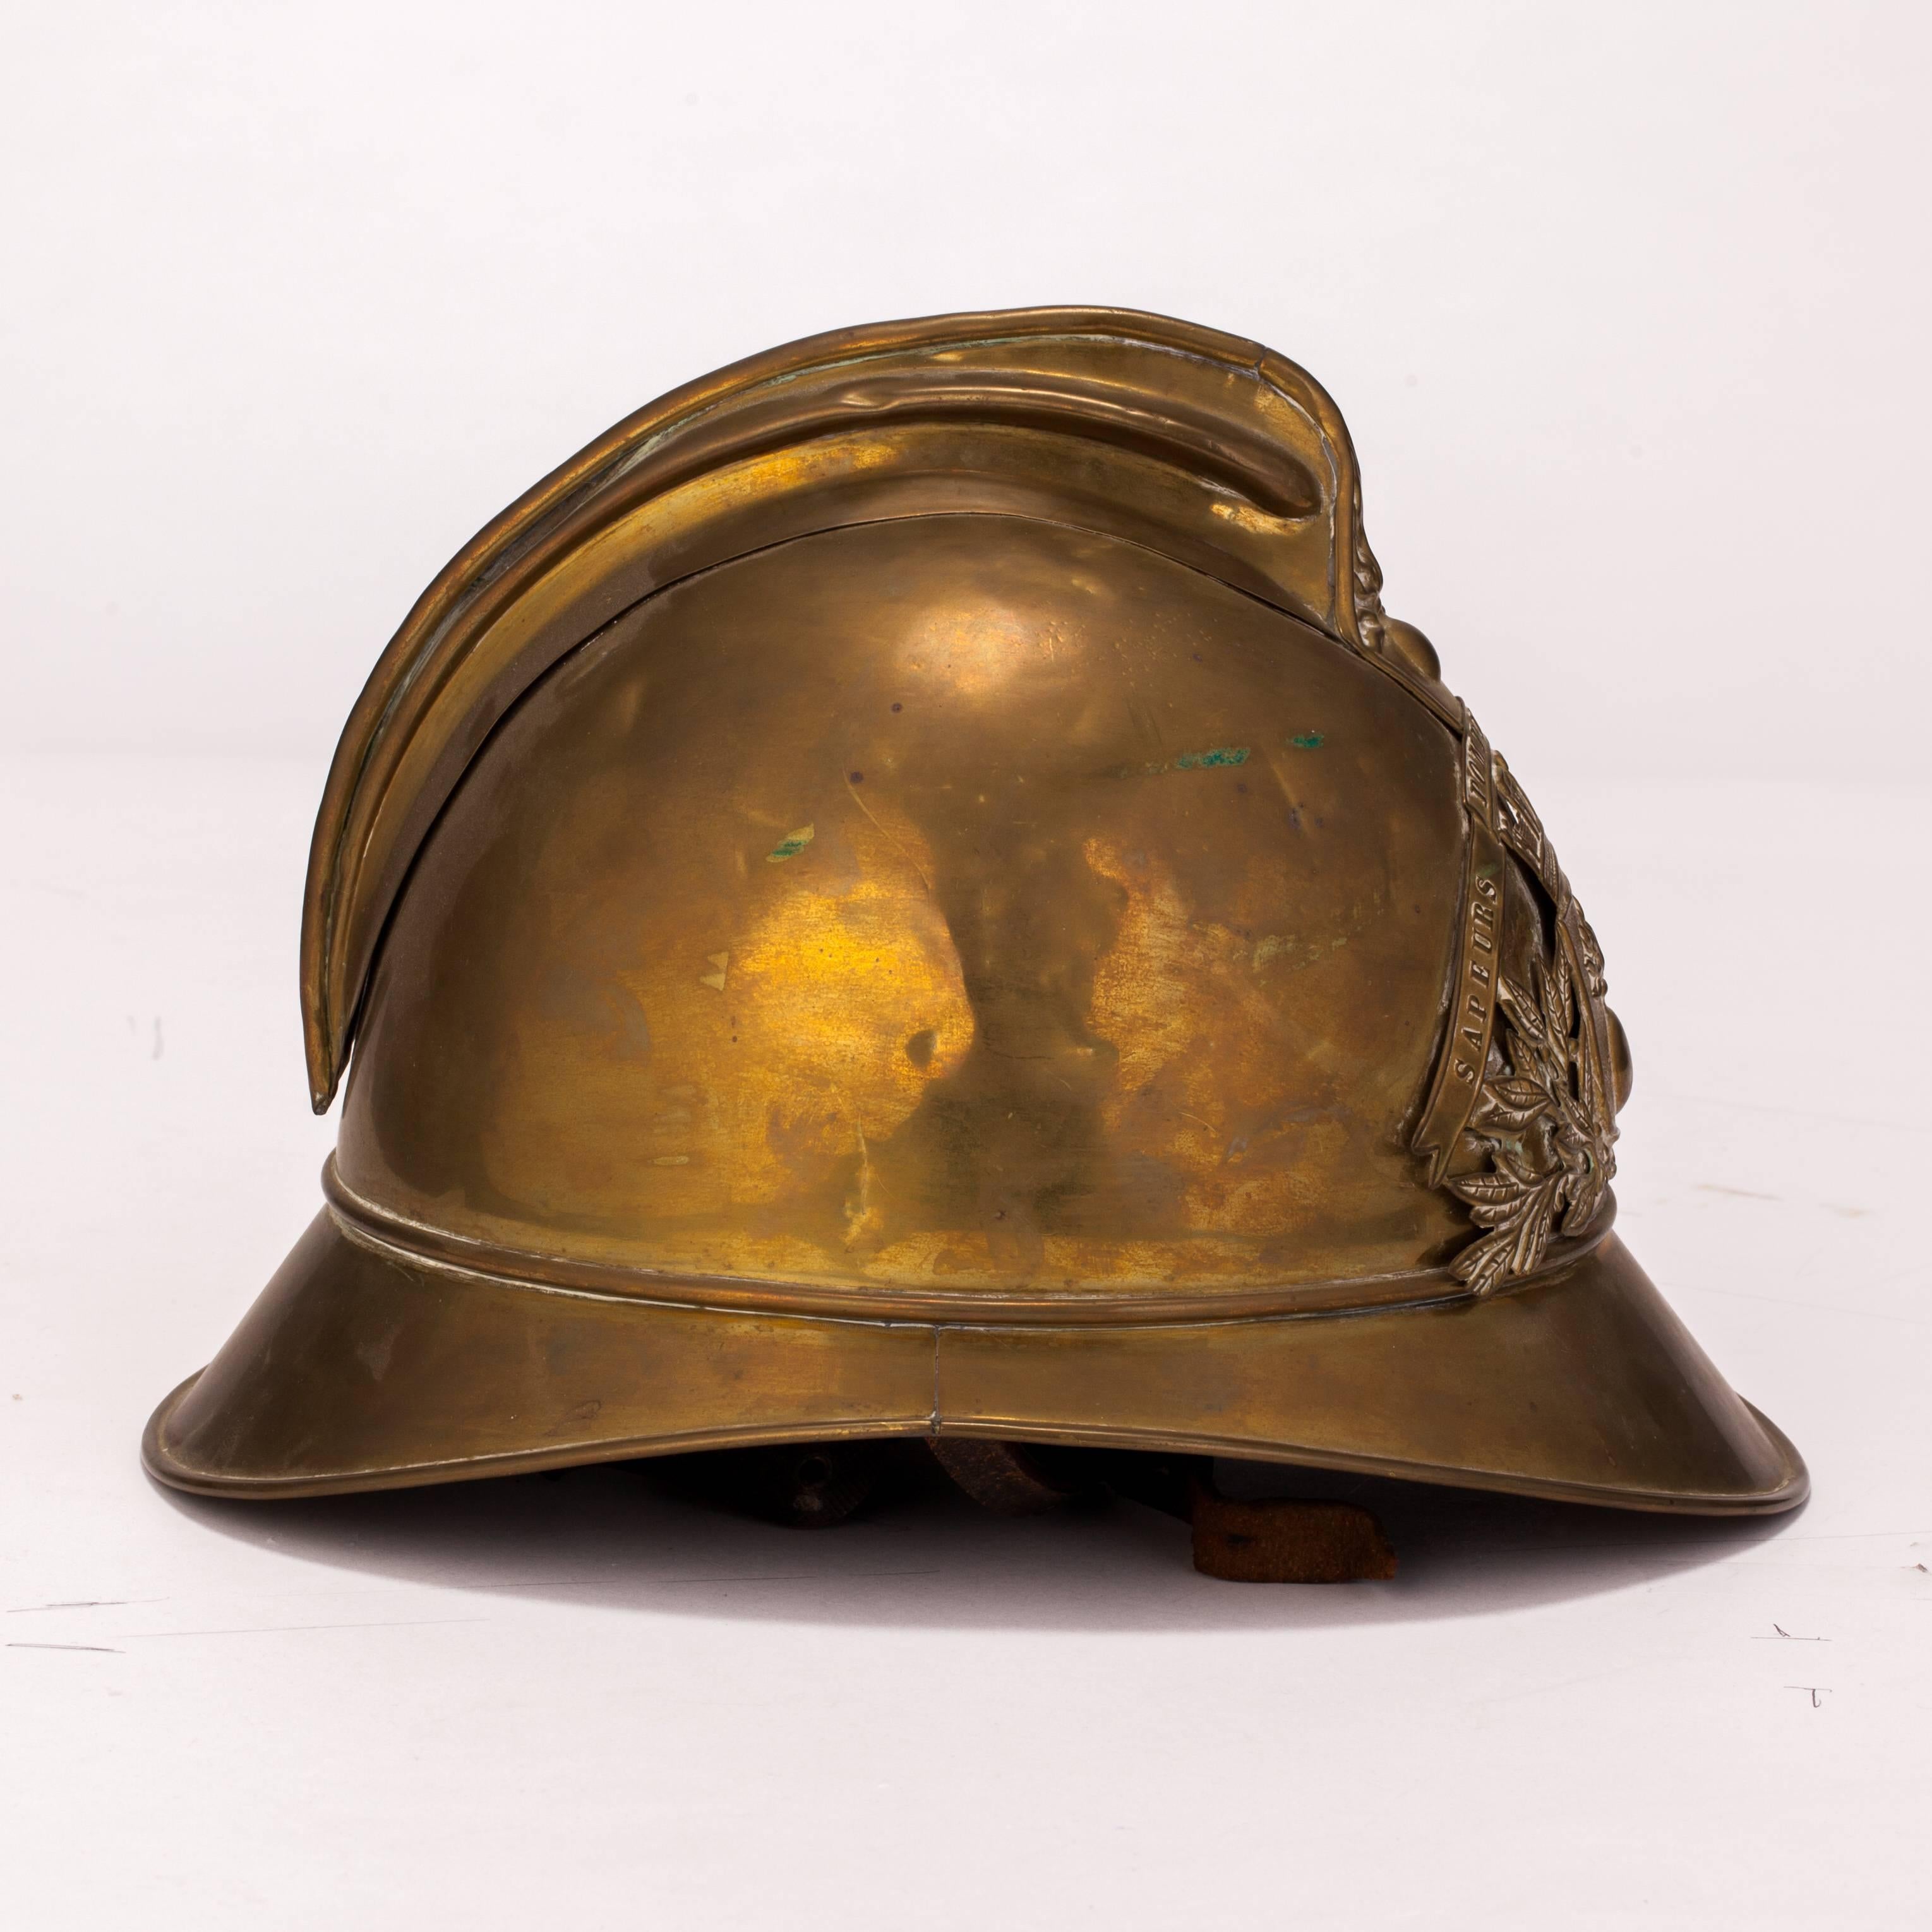 Old helmet of the firemen of Saint Venant (between Lille and Dunkirk). The helmet is in brass with leather inside.